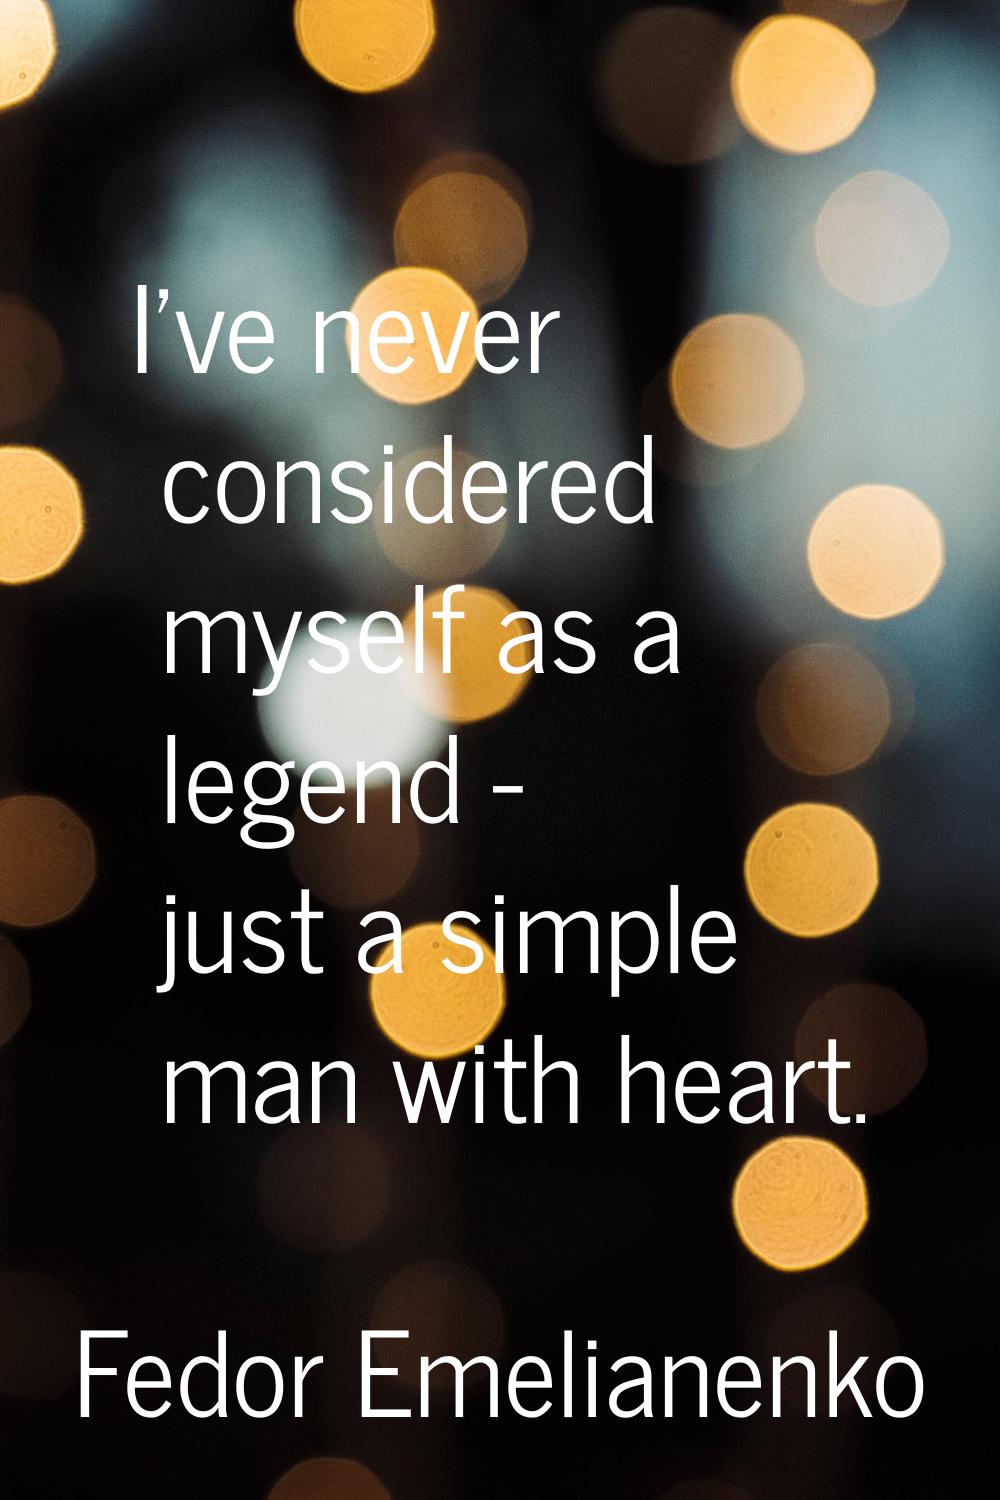 I've never considered myself as a legend - just a simple man with heart.